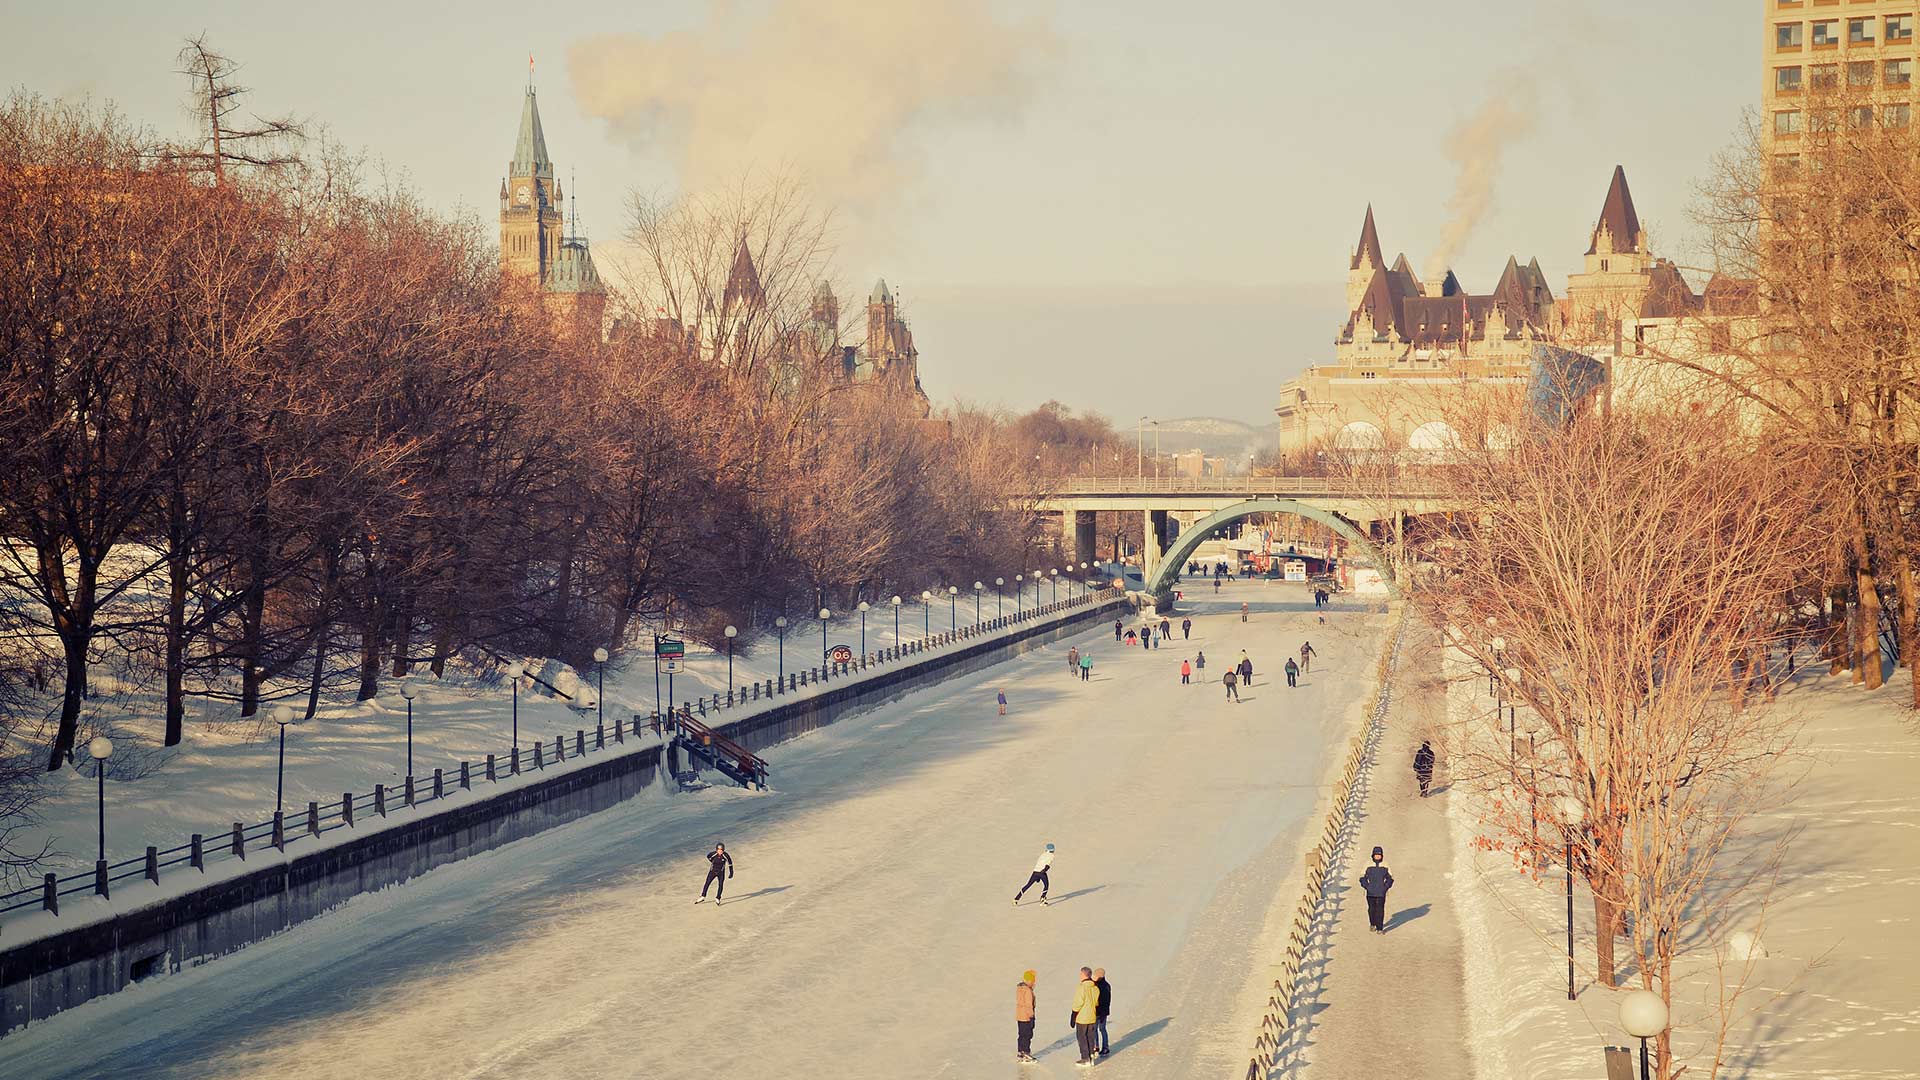 Rideau Canal Skateway during Winterlude in Ottawa, Canada - Preappy/Getty Images)